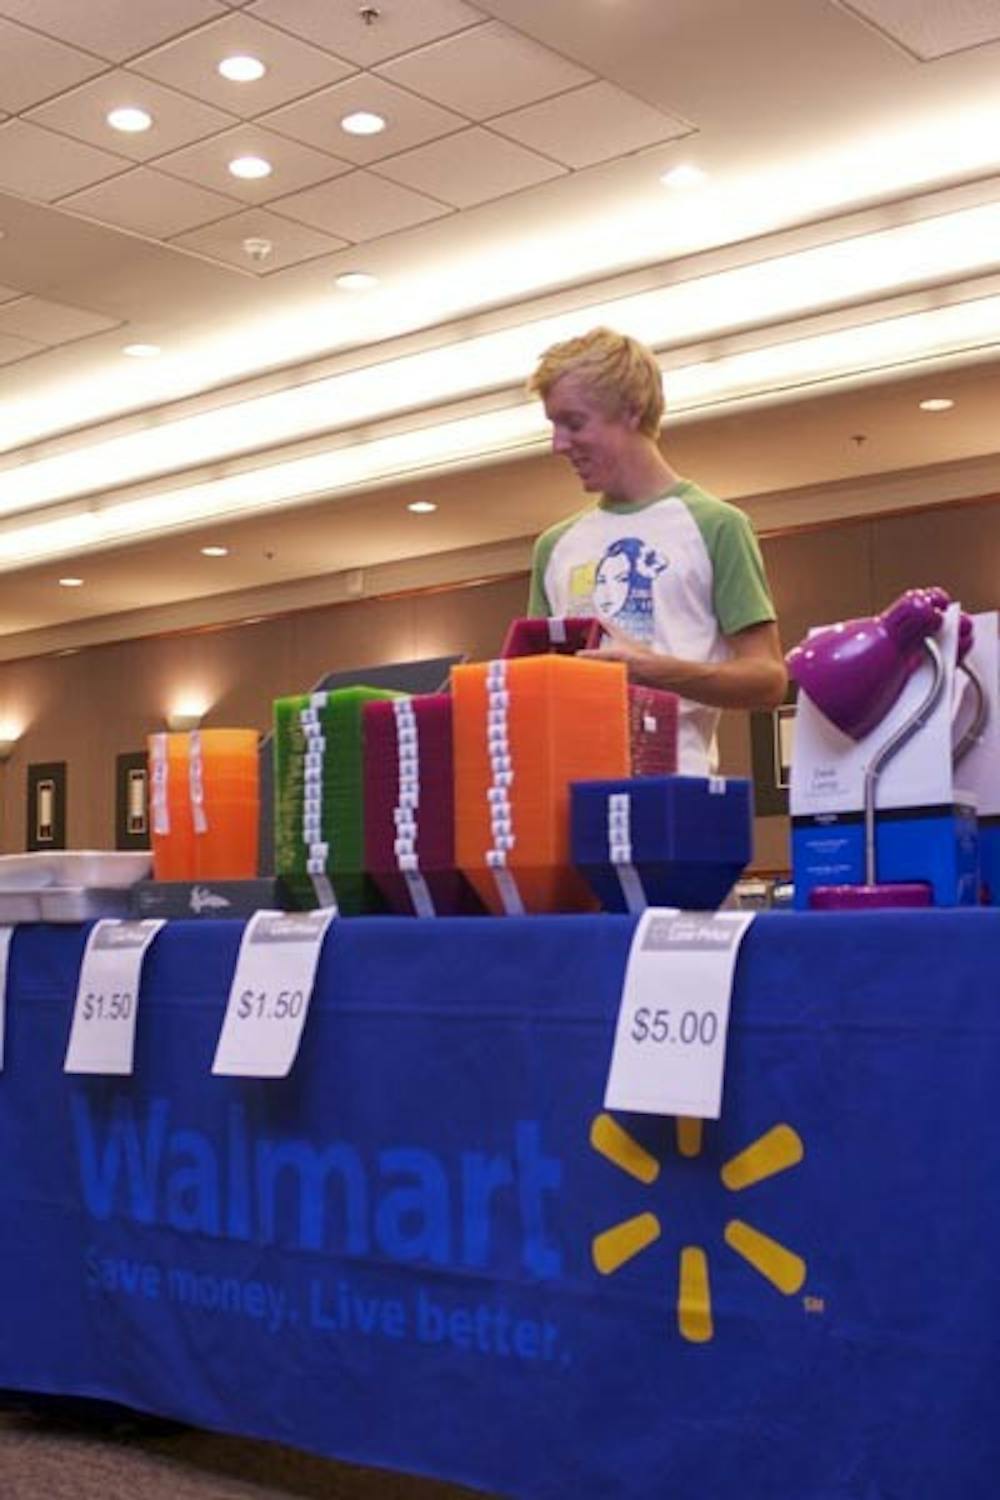 WAL TO WALL: Walmart set up a smaller version of its store in the basement of the Memorial Union during move-in week to allow students like Colton Tuttle to purchase any last minute supplies they may have forgotten for their dorm or apartment. (Photo by Scott Stuk)